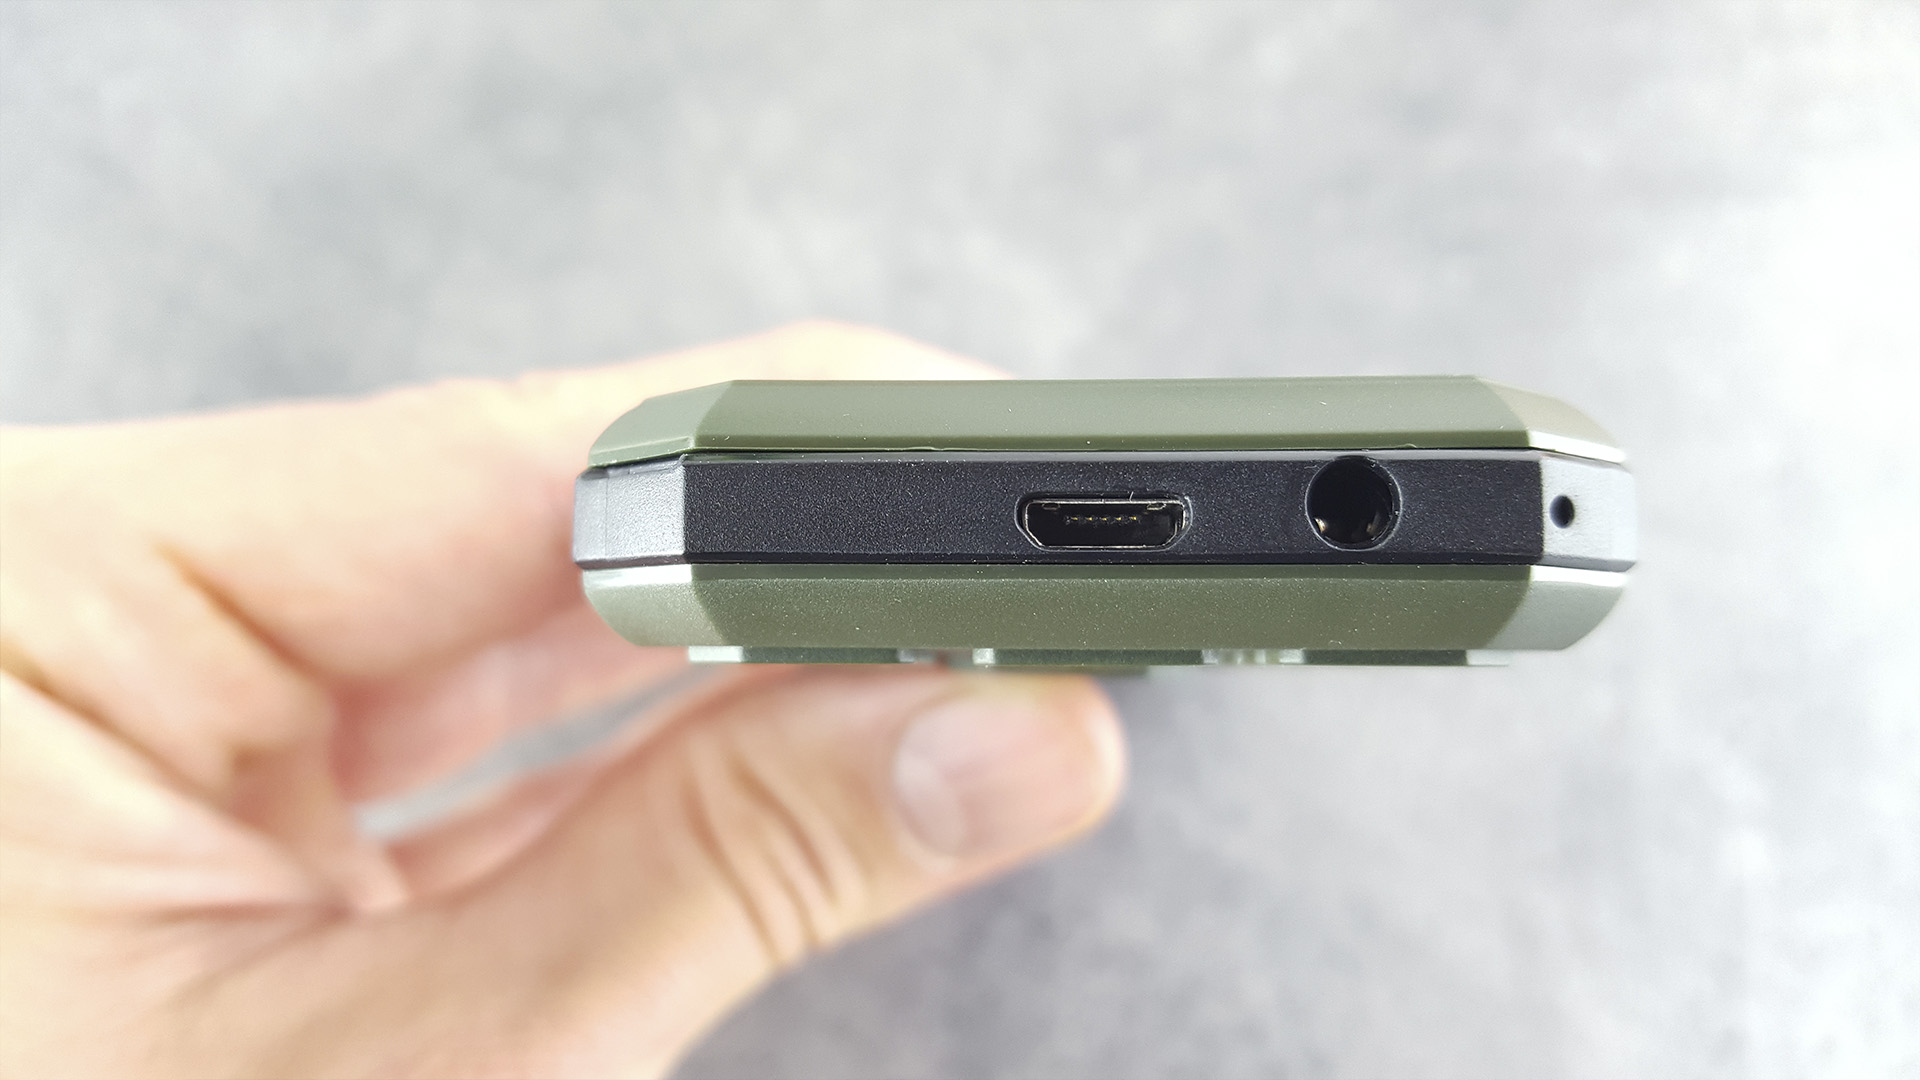 INOI 244Z military phone overview from below